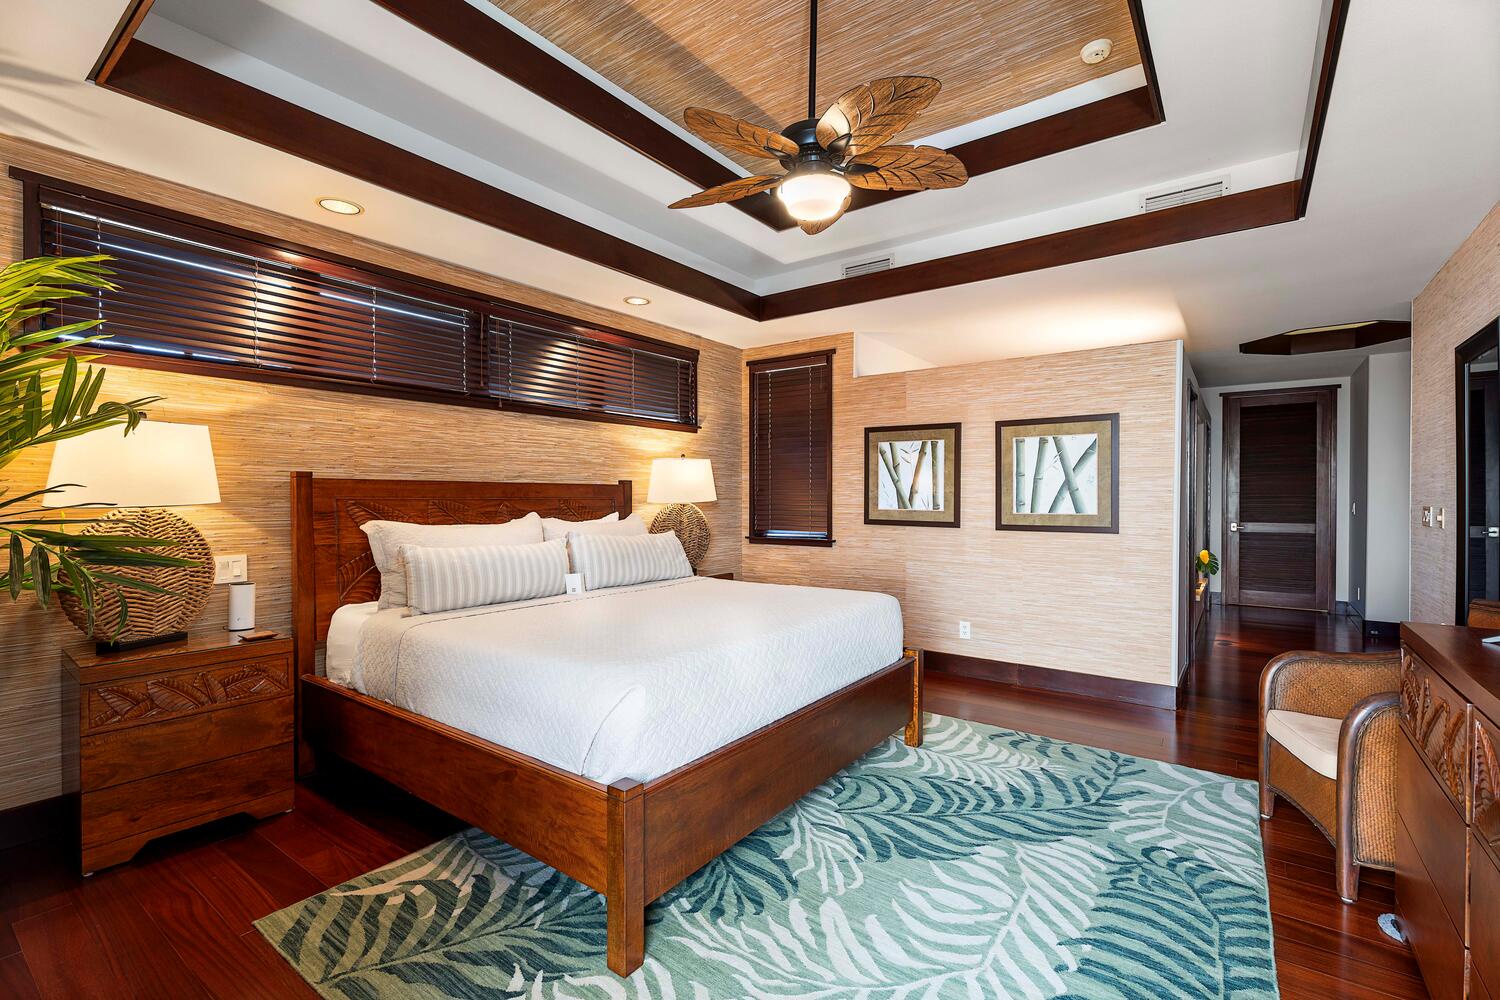 Kailua Kona Vacation Rentals, Island Oasis - Facing back from the sliding doors down the hall to the attached ensuite